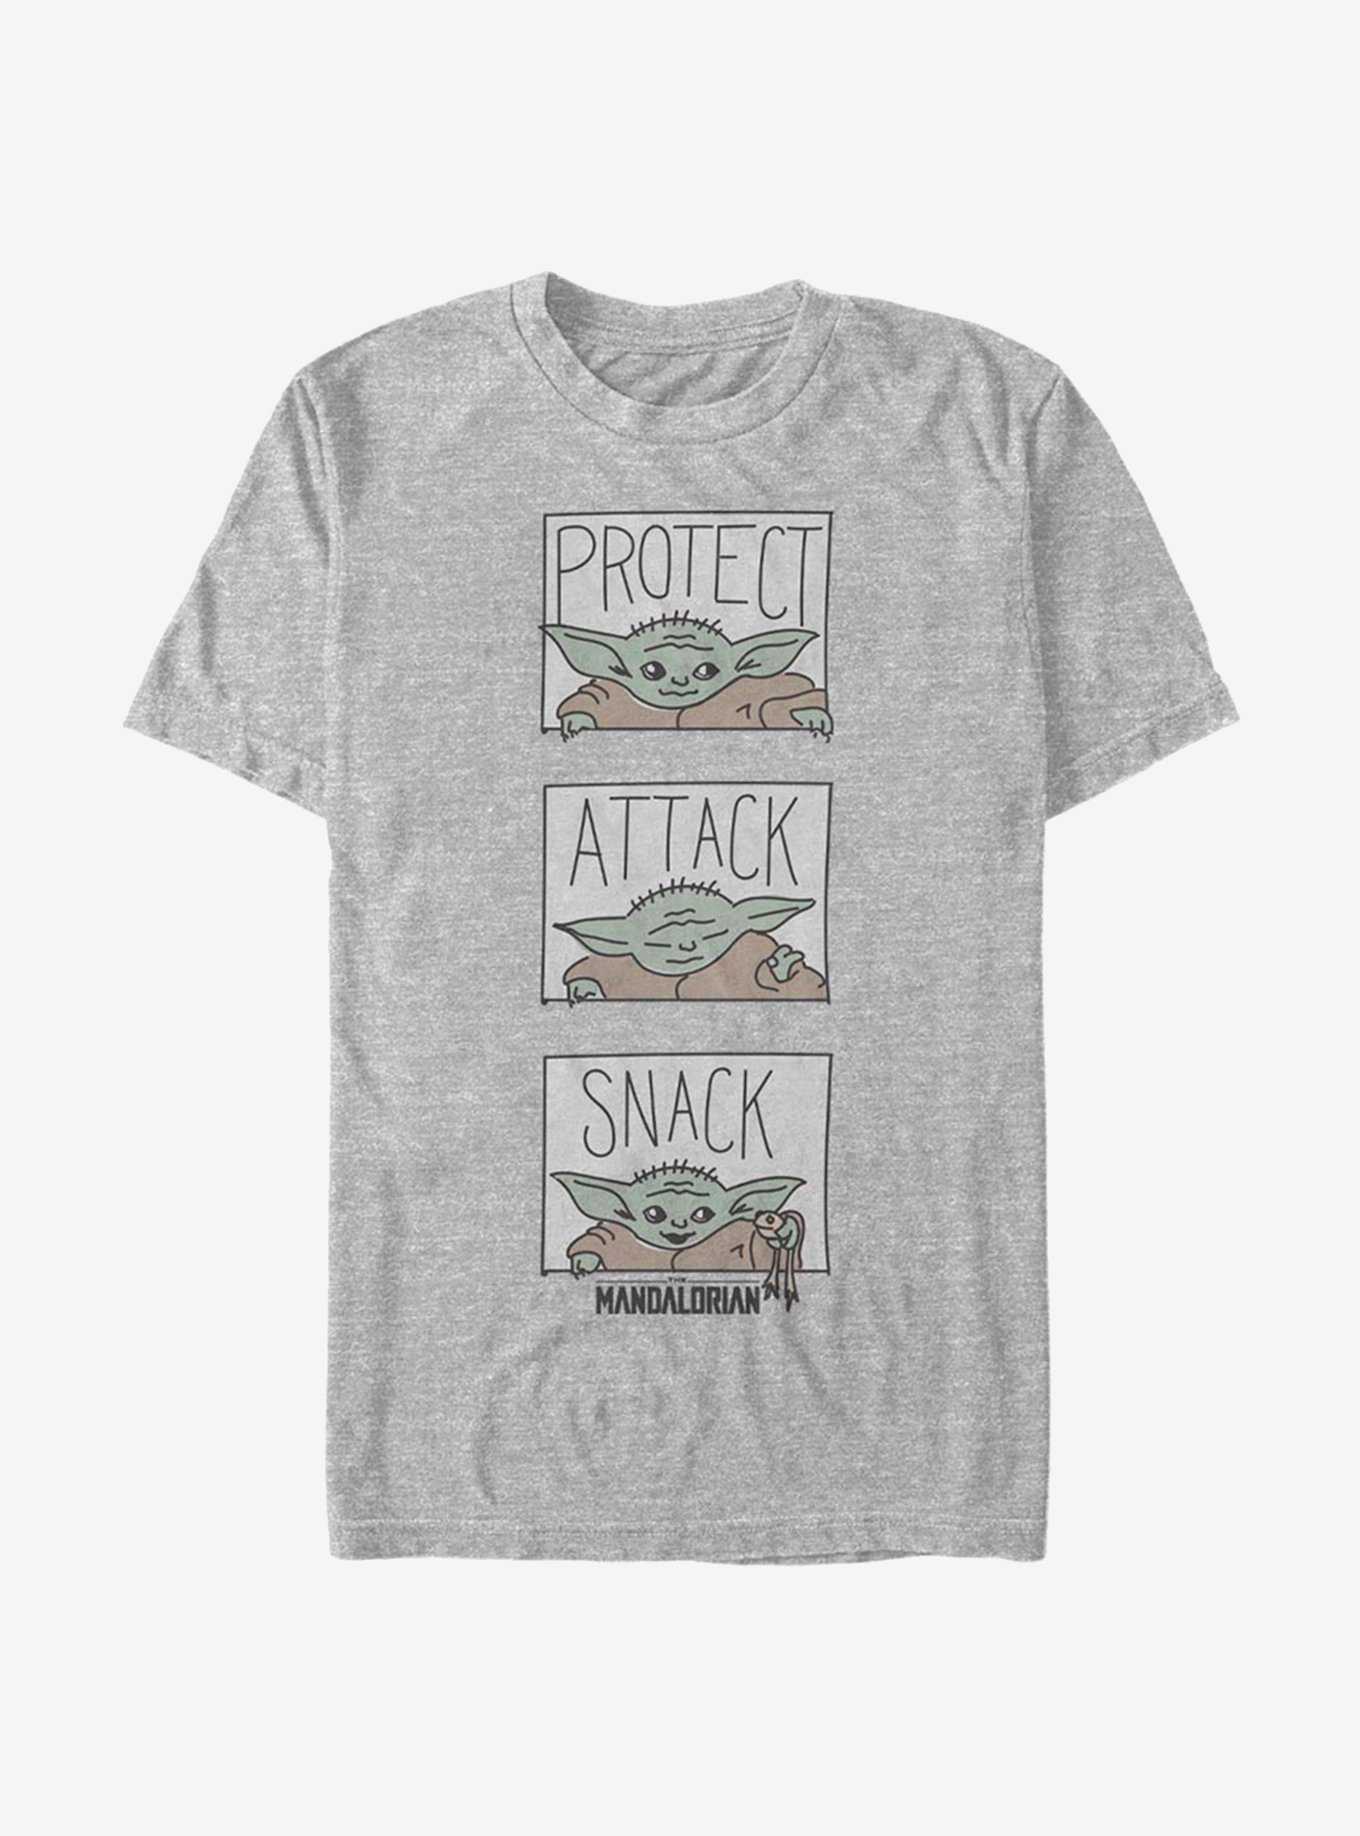 Star Wars The Mandalorian The Child Protect Attack Snack T-Shirt, , hi-res